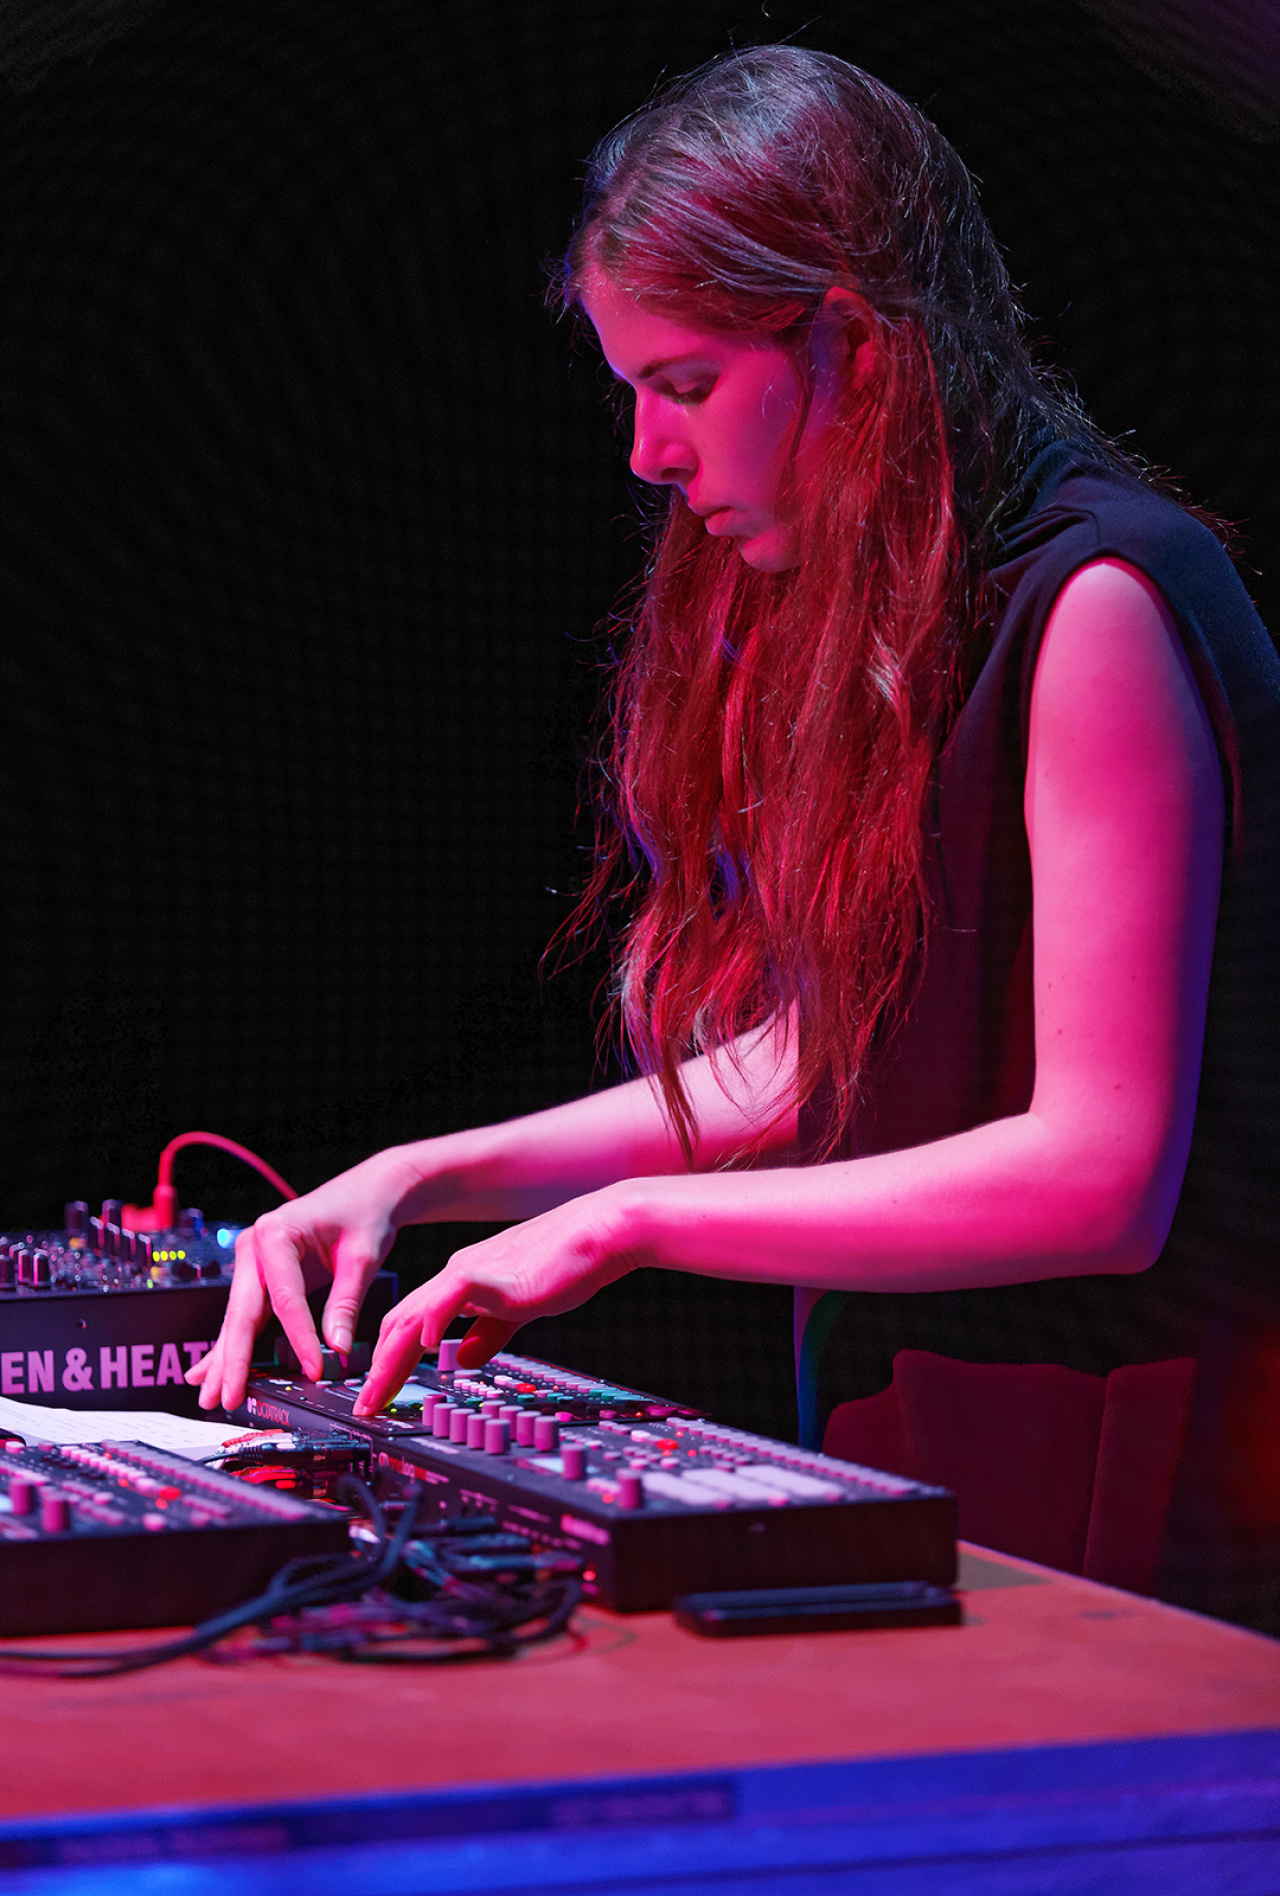 The photo shows musician and producer Laurel Halo during her performance at festival »sonic experiments« in July 2015.